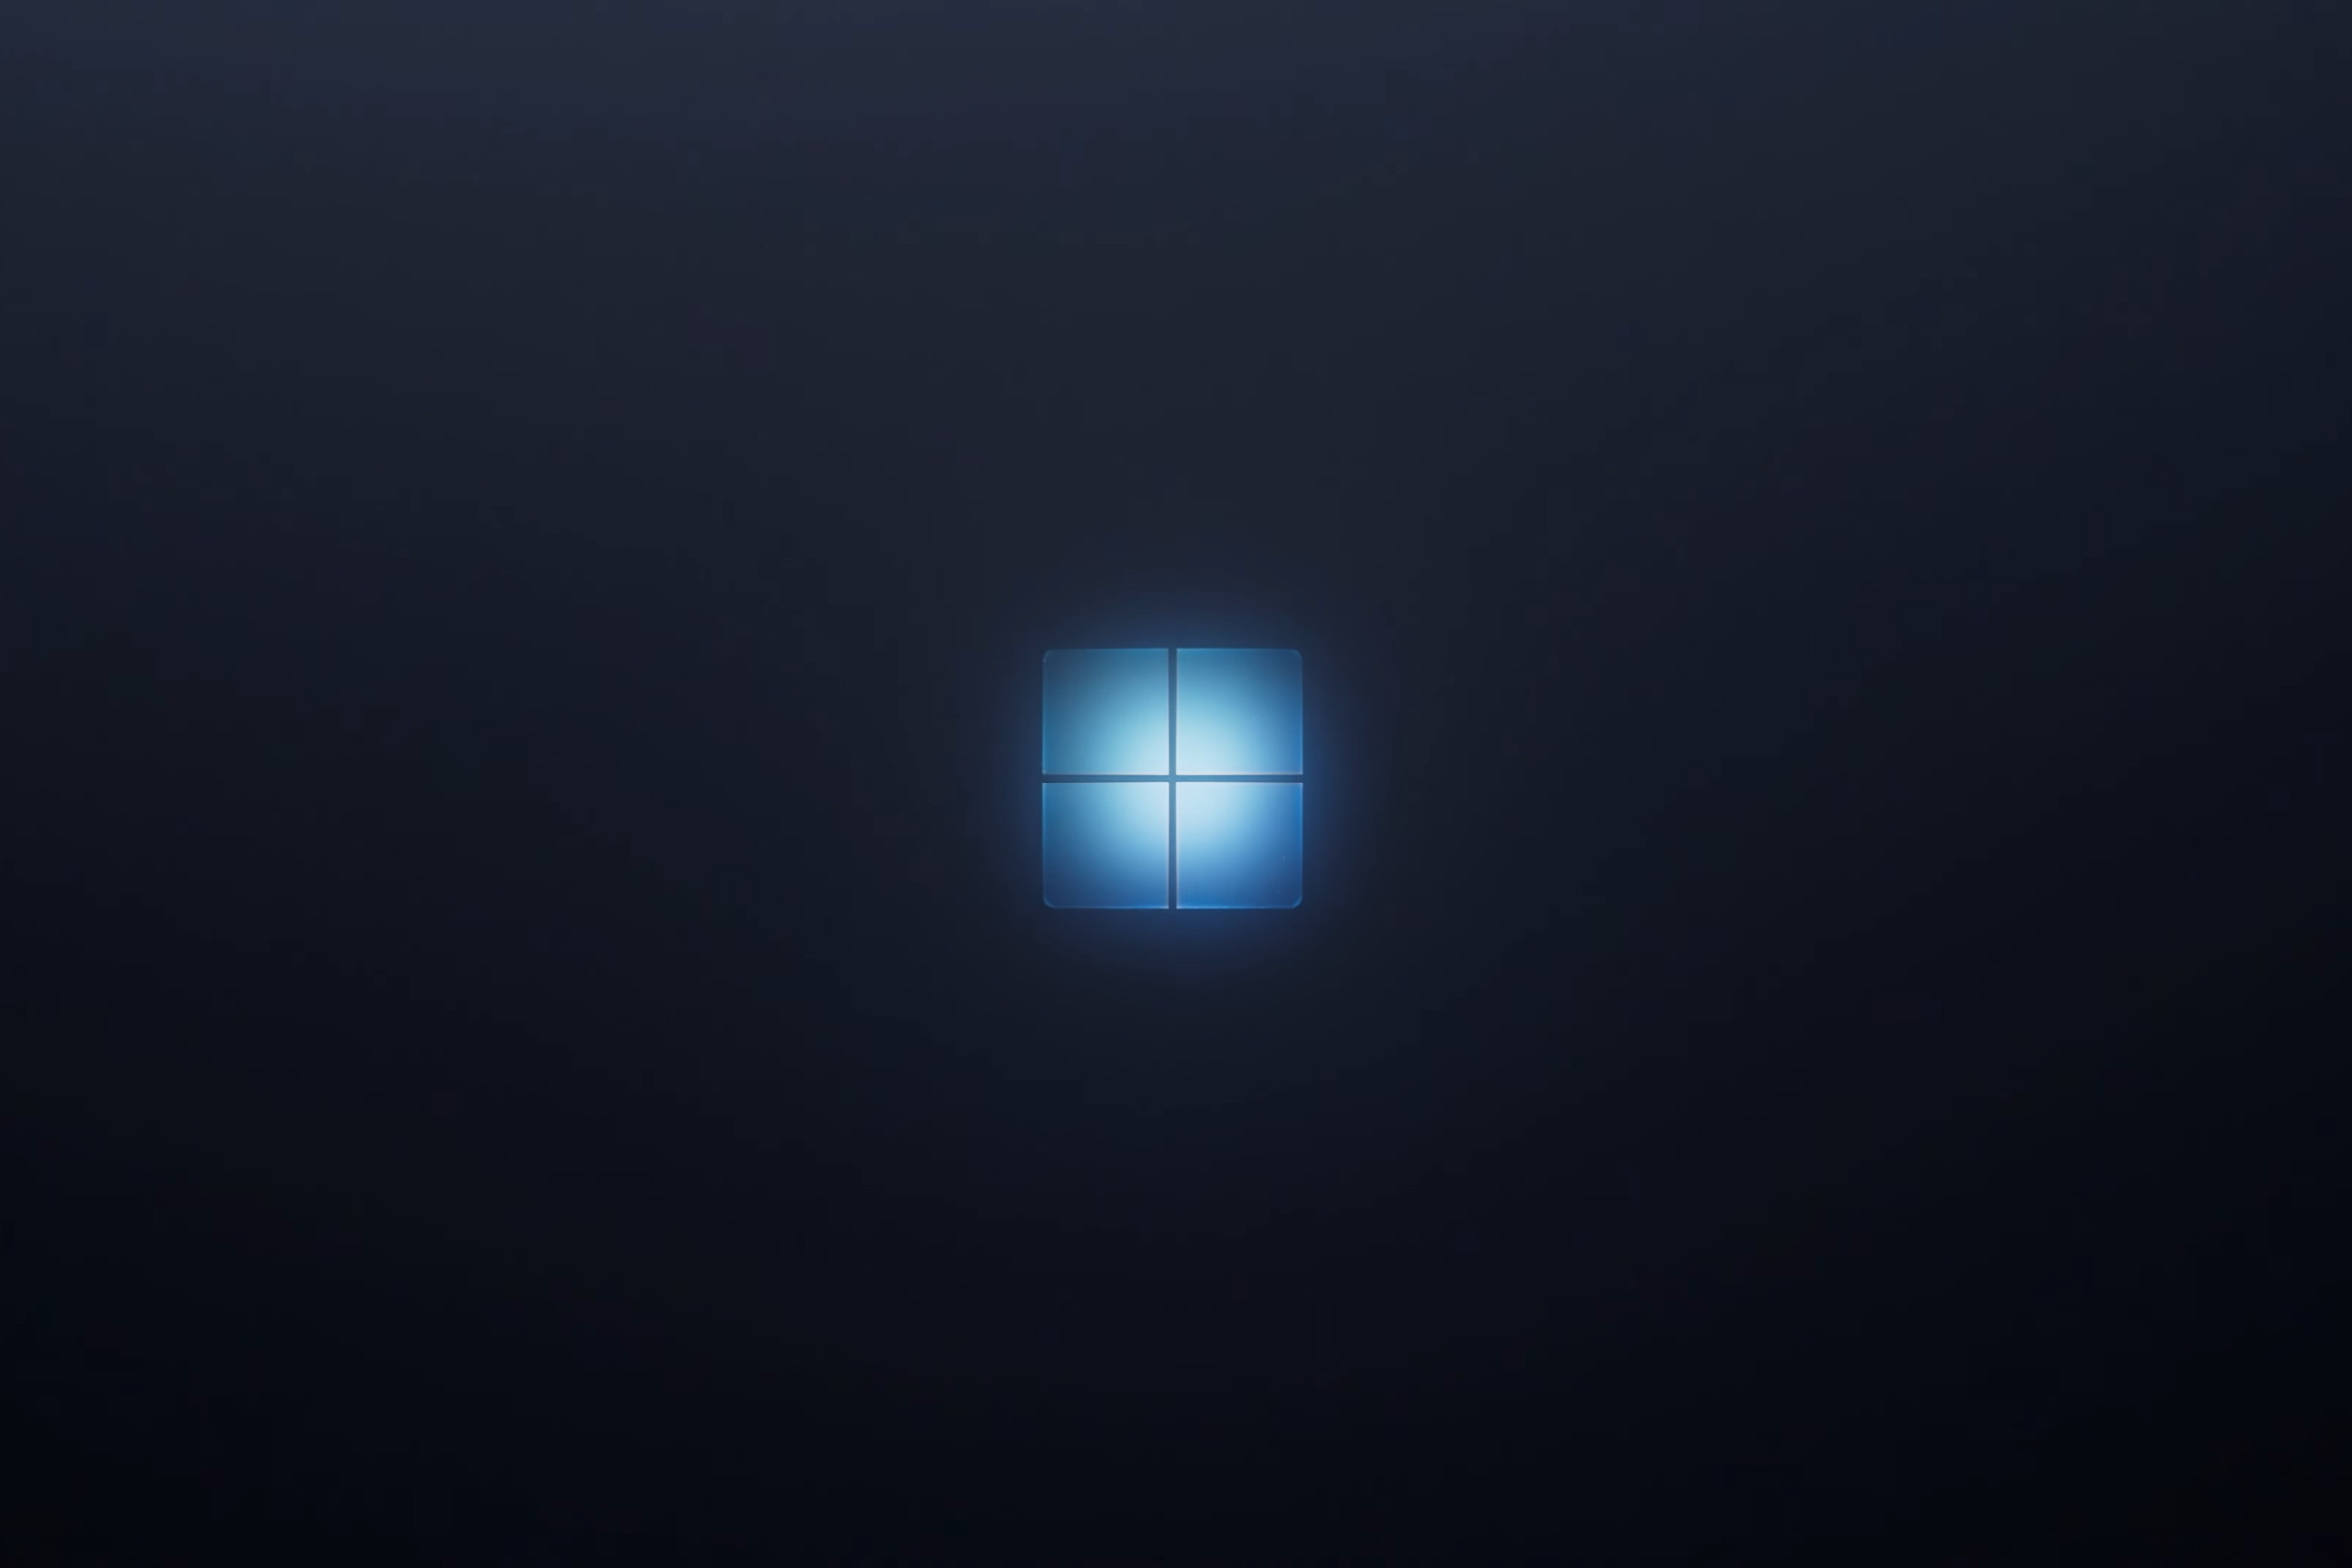 Illustration of the Windows logo and a dark background